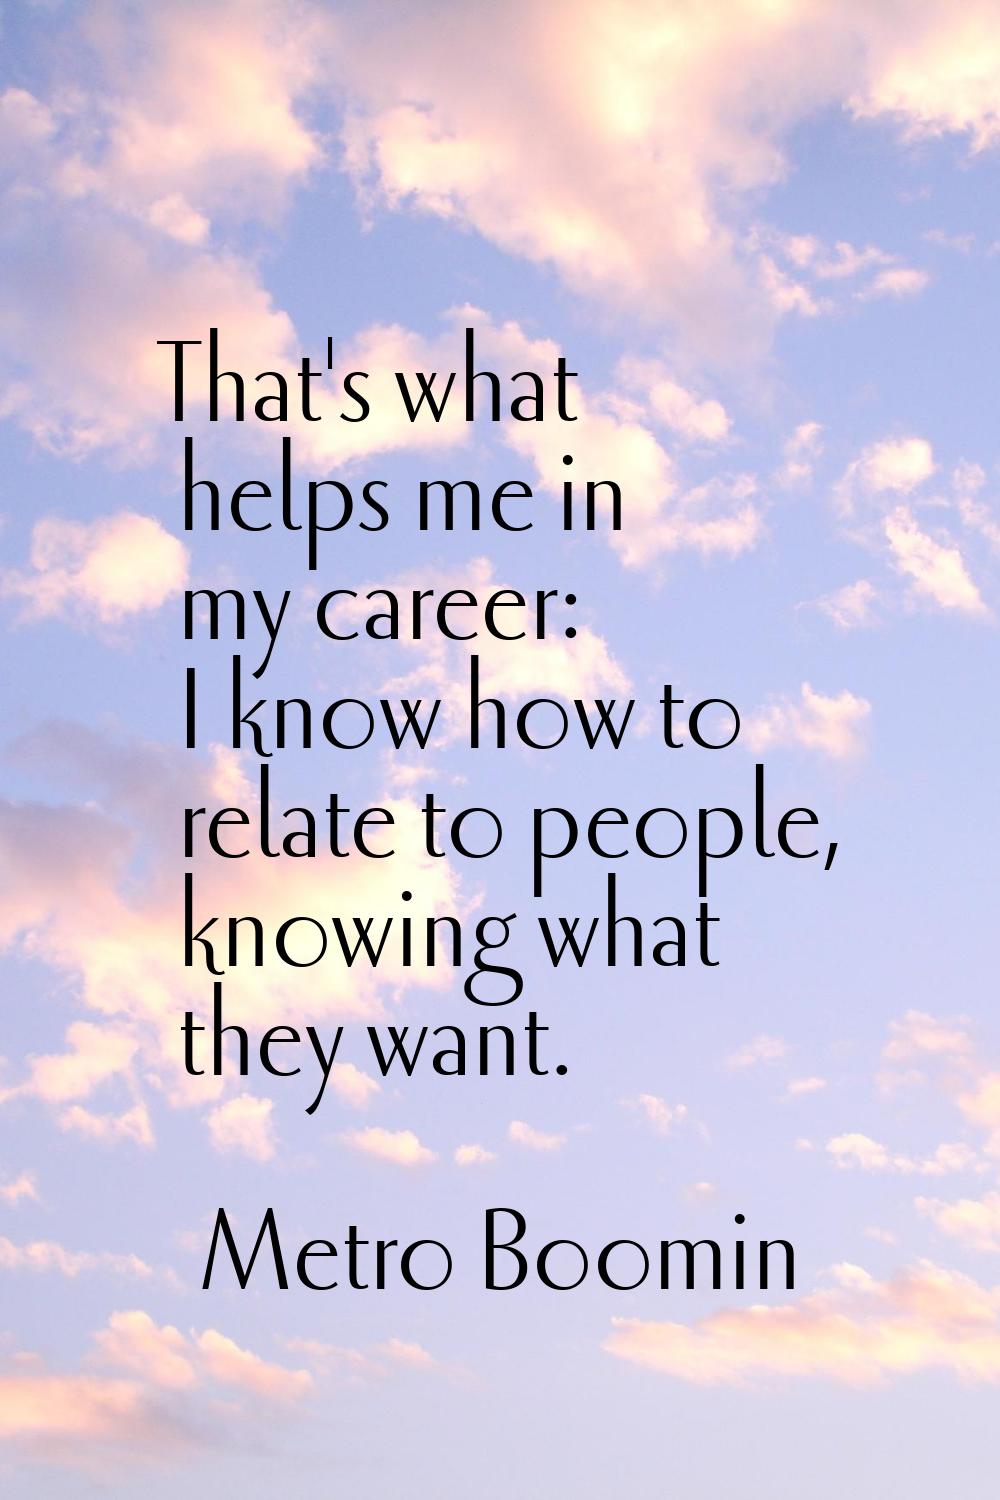 That's what helps me in my career: I know how to relate to people, knowing what they want.